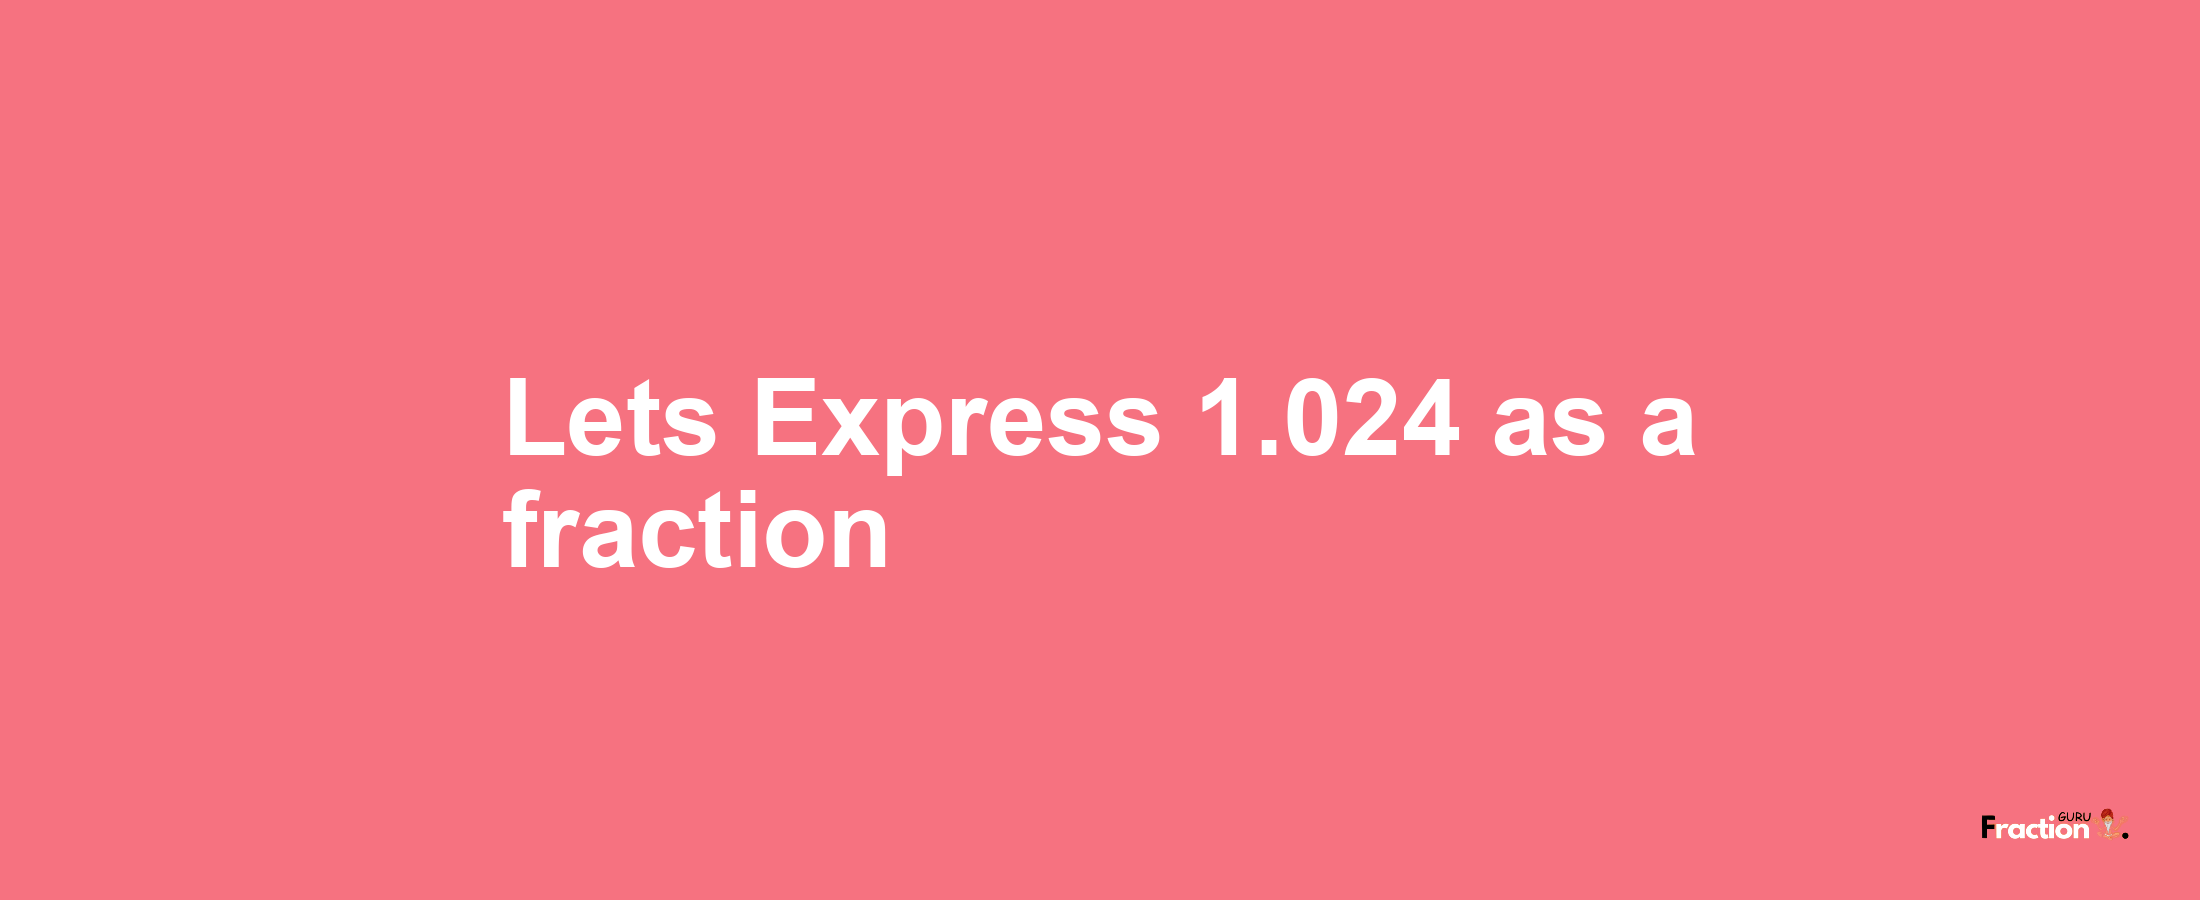 Lets Express 1.024 as afraction